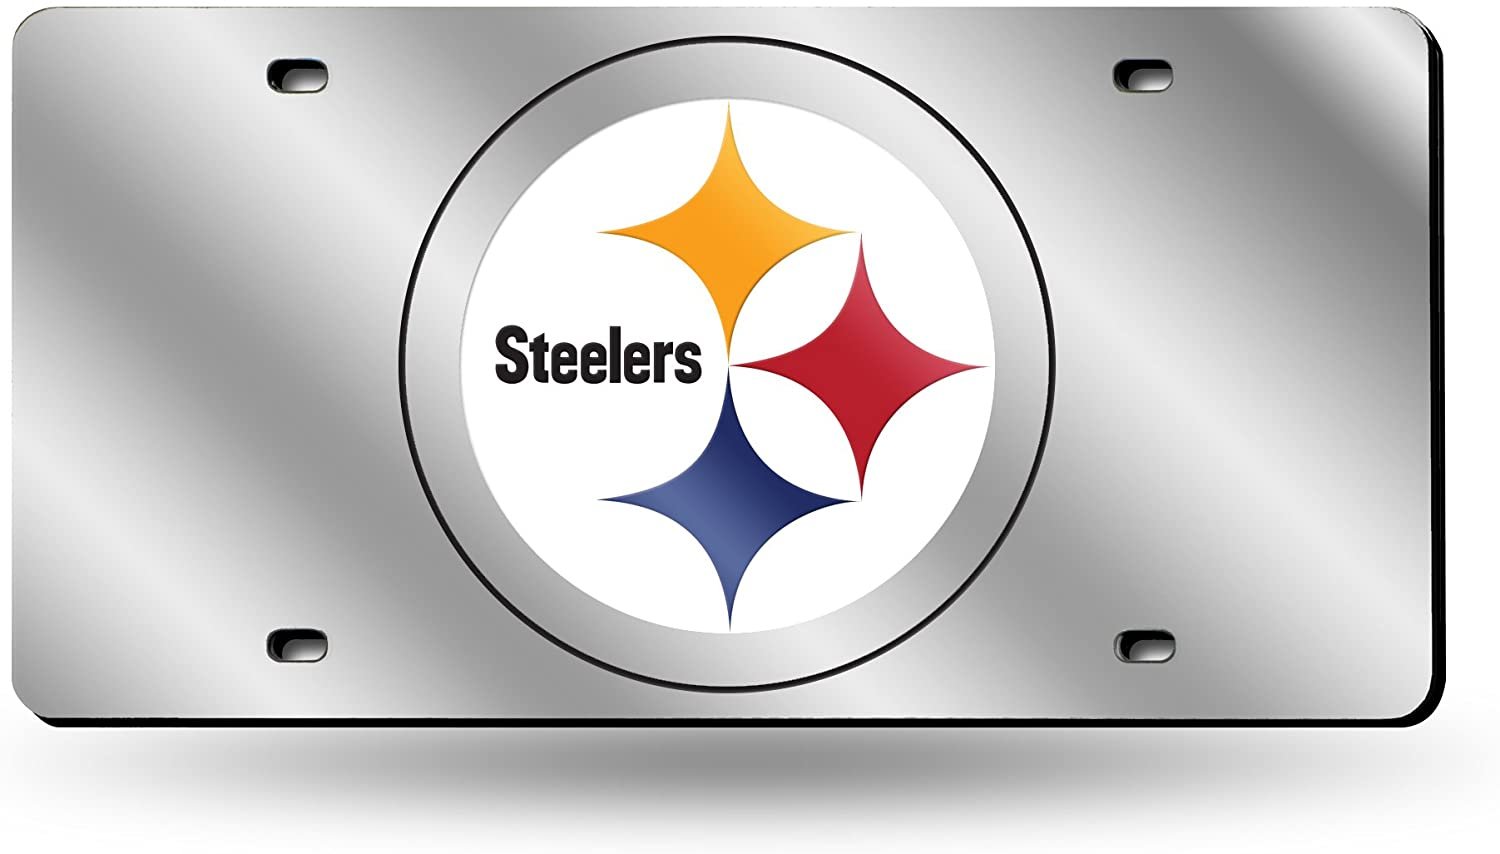 Pittsburgh Steelers Premium Laser Cut Tag License Plate, Mirrored Acrylic Inlaid, 12x6 Inch